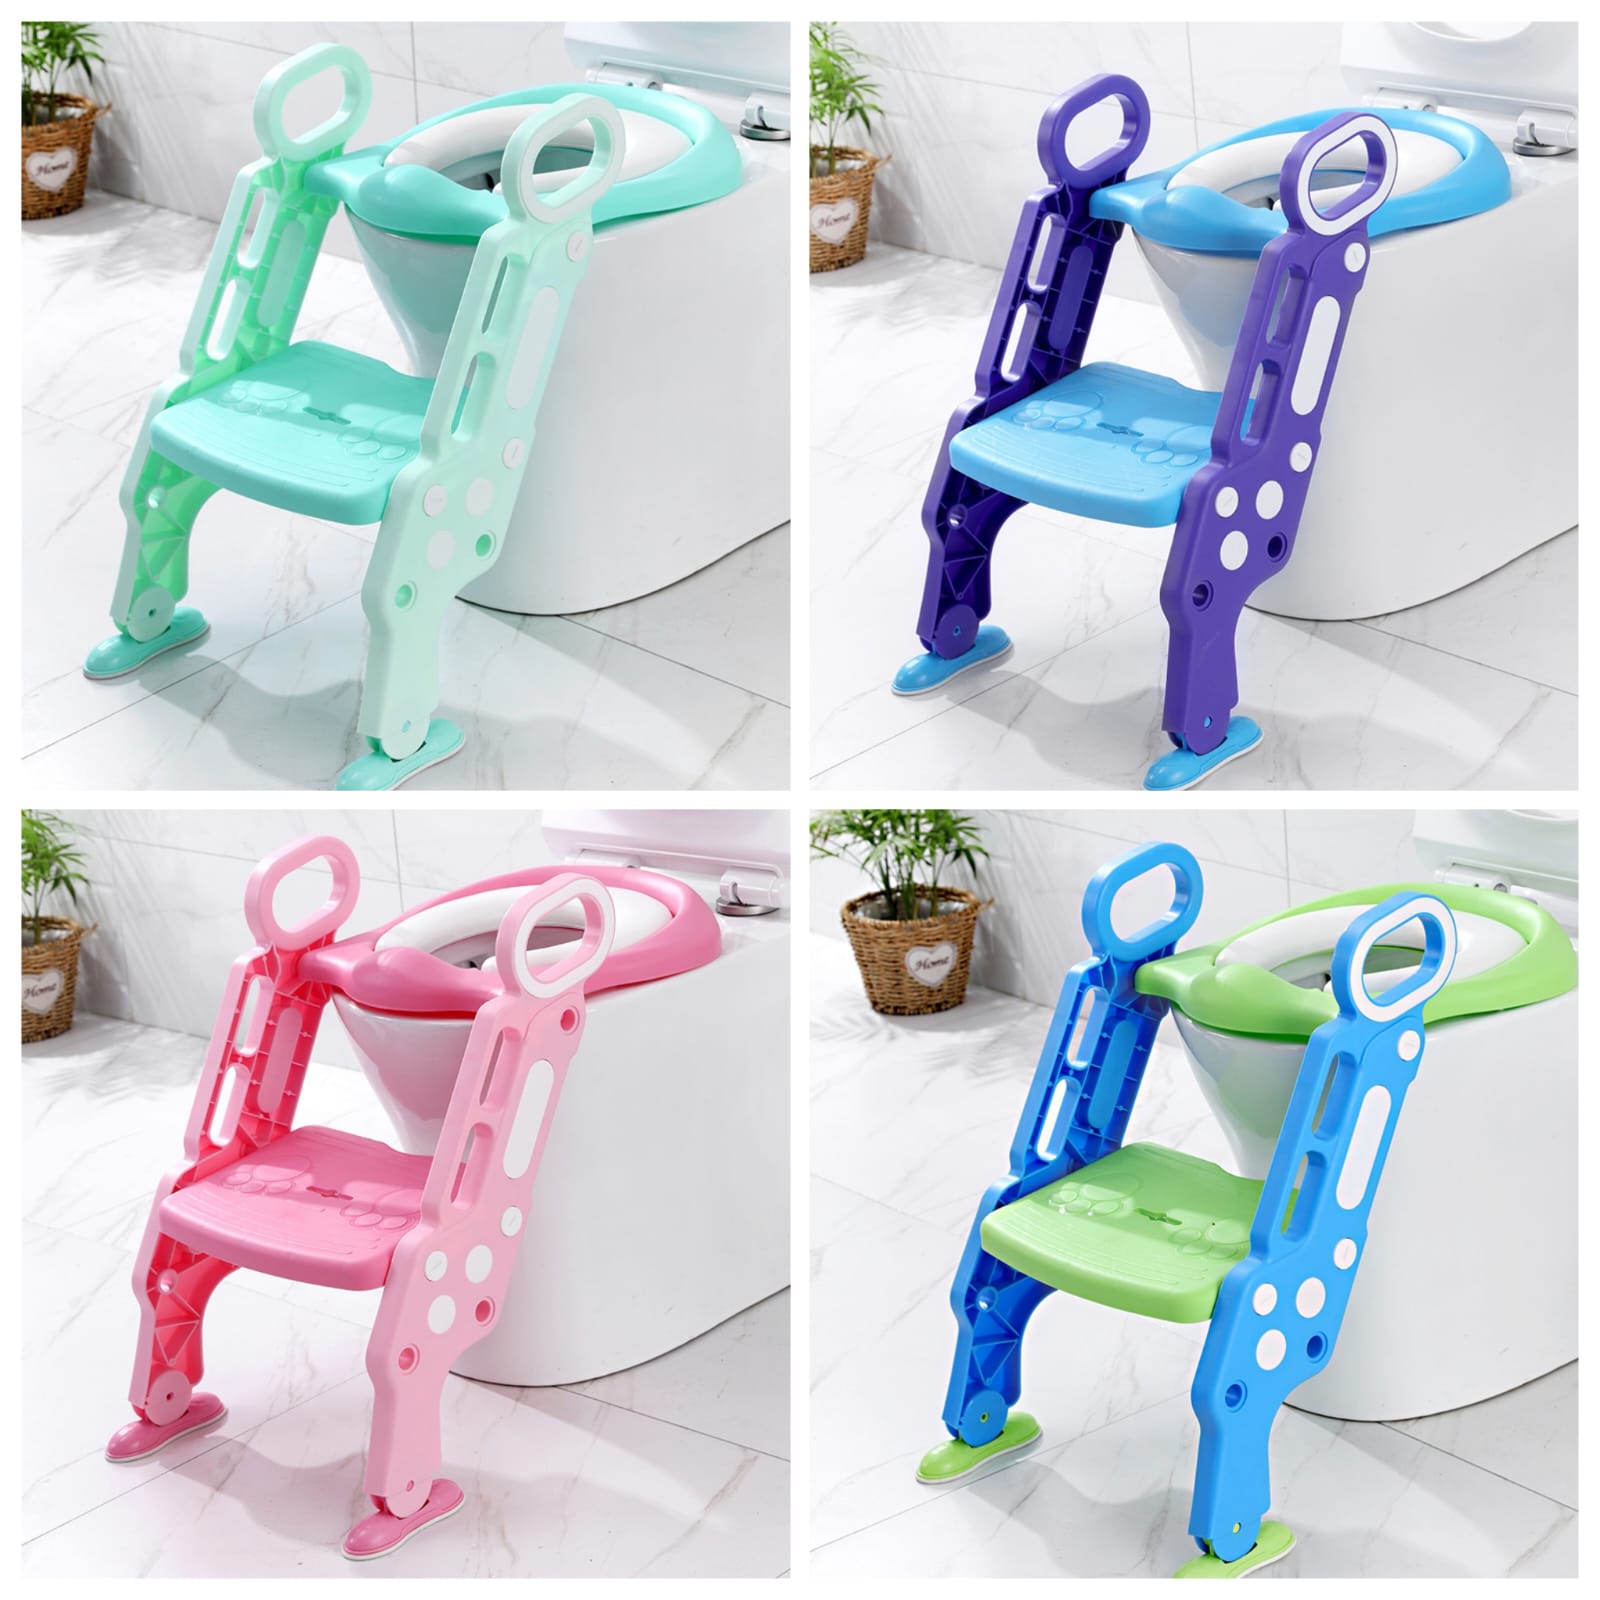 Pikkaboo EasyGo+ Potty Training Seat with Step Ladder